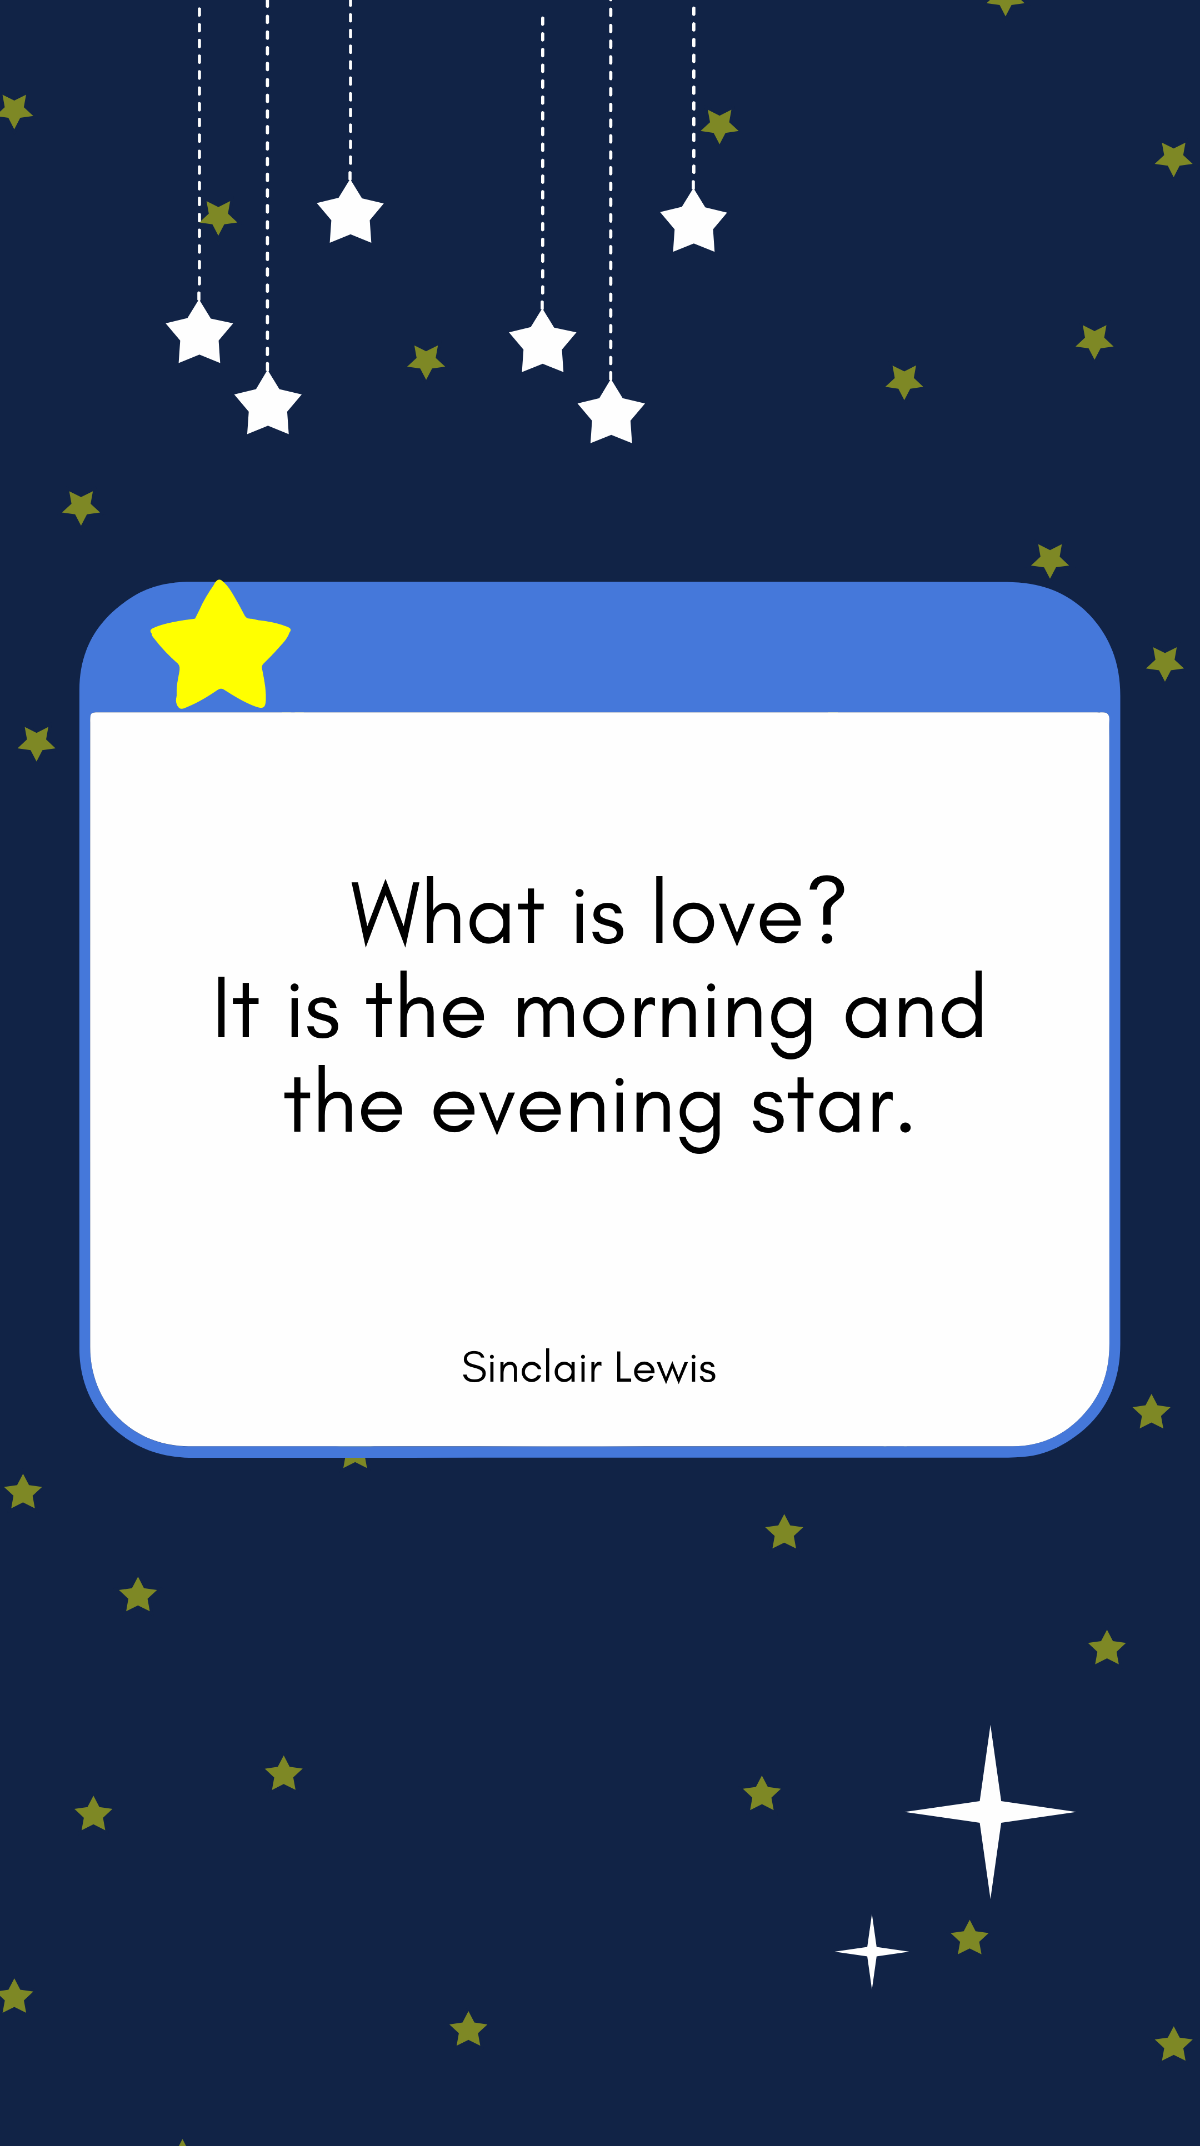 Sinclair Lewis - “What is love? It is the morning and the evening star.”  Template